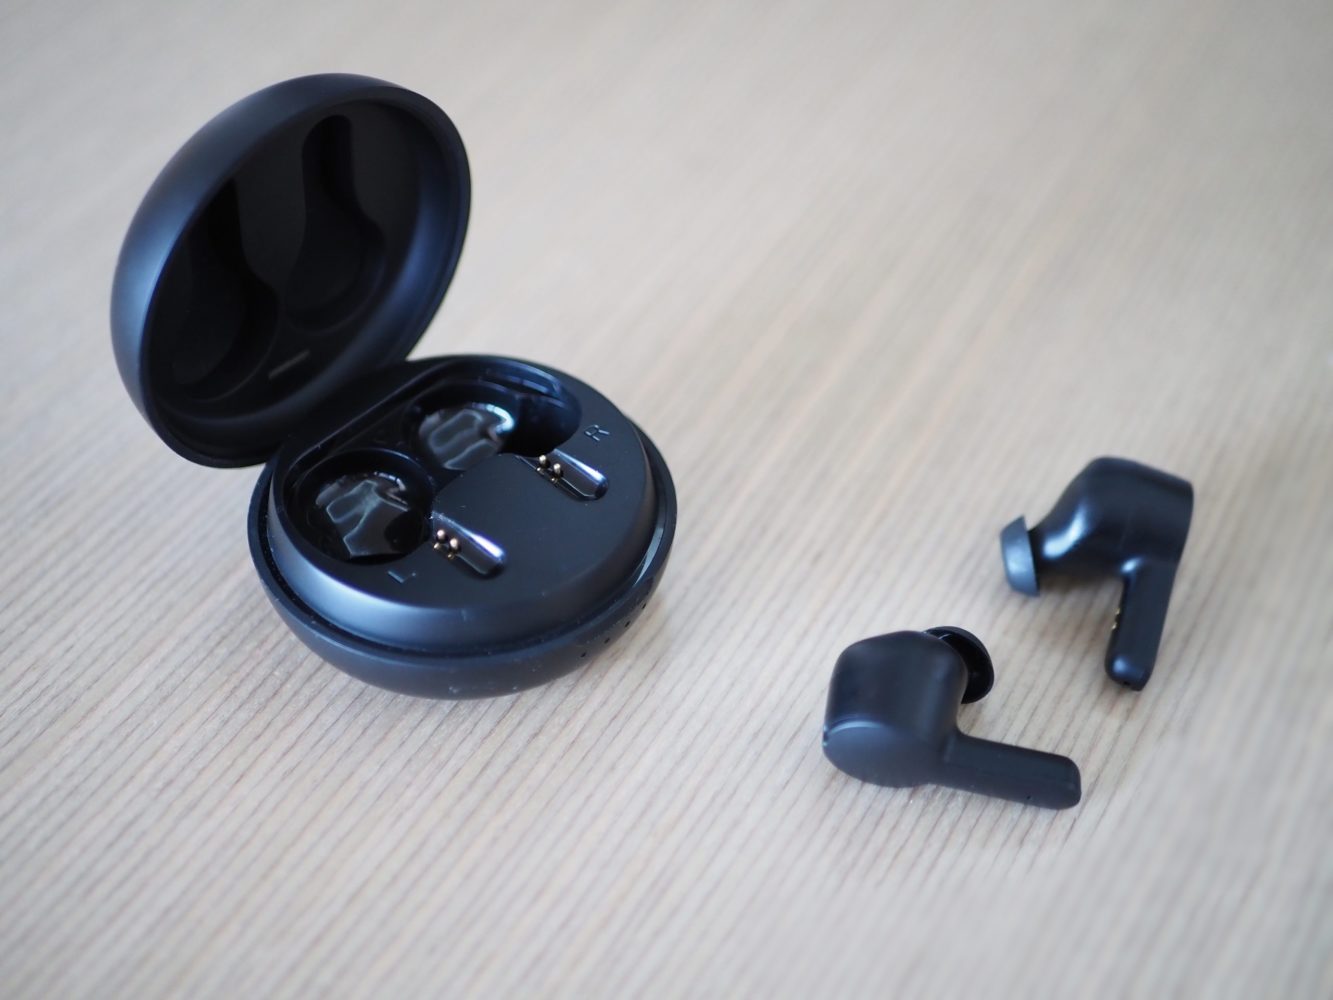 Tribit FlyBuds NC Manual - How to charge the earbuds?